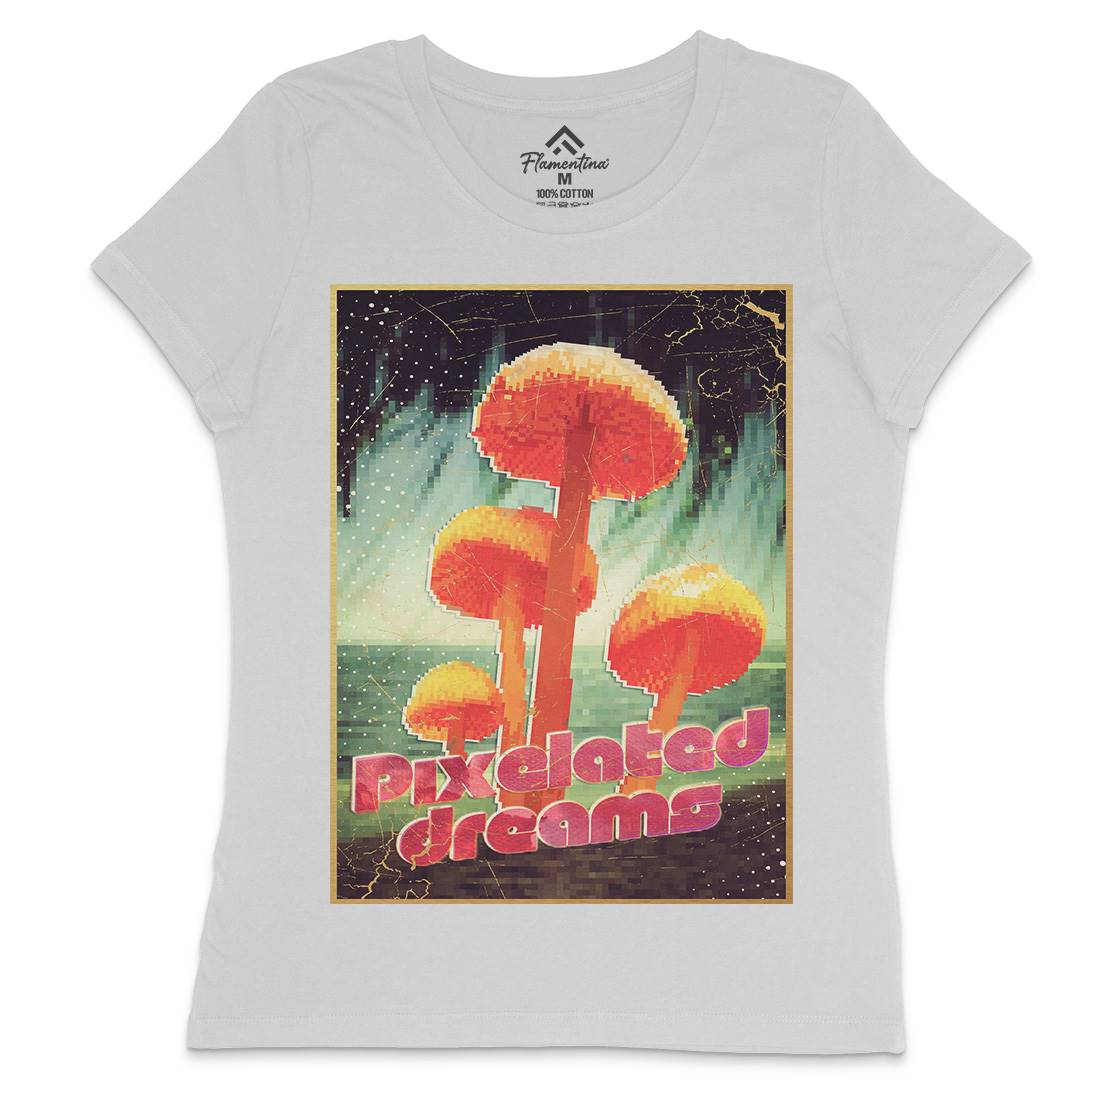 Pixelated Dreams Womens Crew Neck T-Shirt Drugs A893